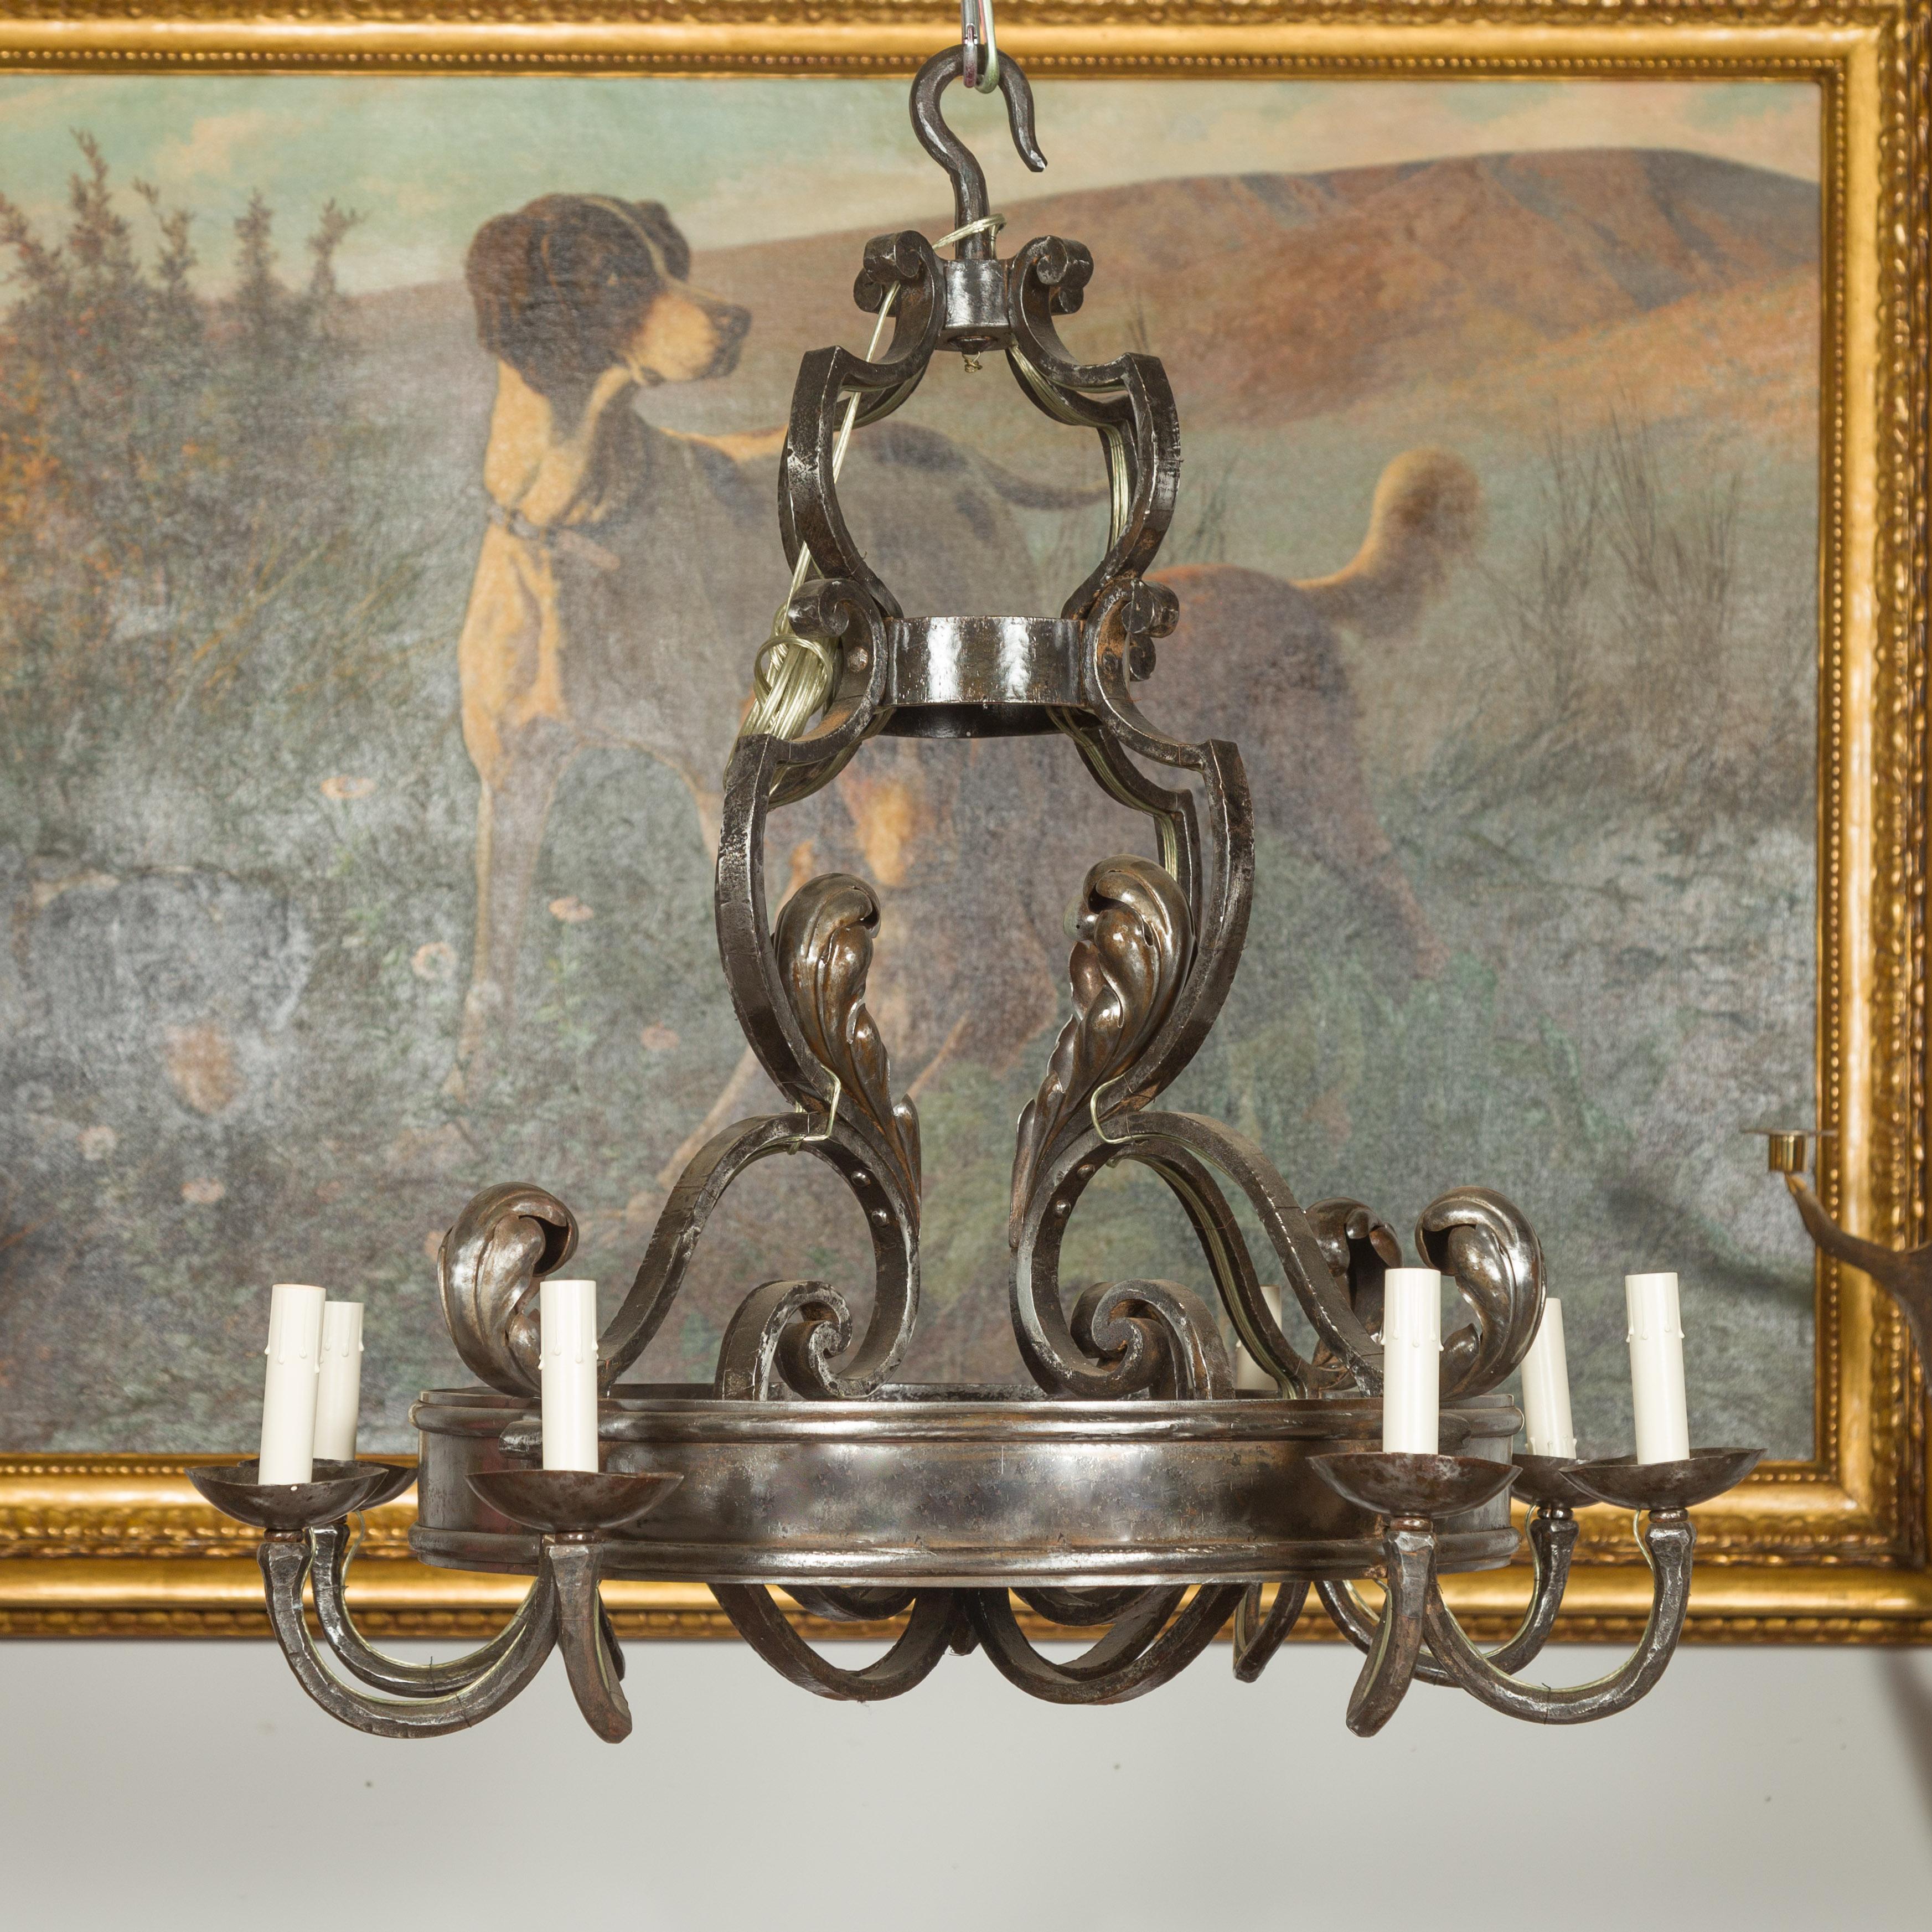 Midcentury French Polished Steel Eight Light Acanthus Leaves Ring Chandelier For Sale 5